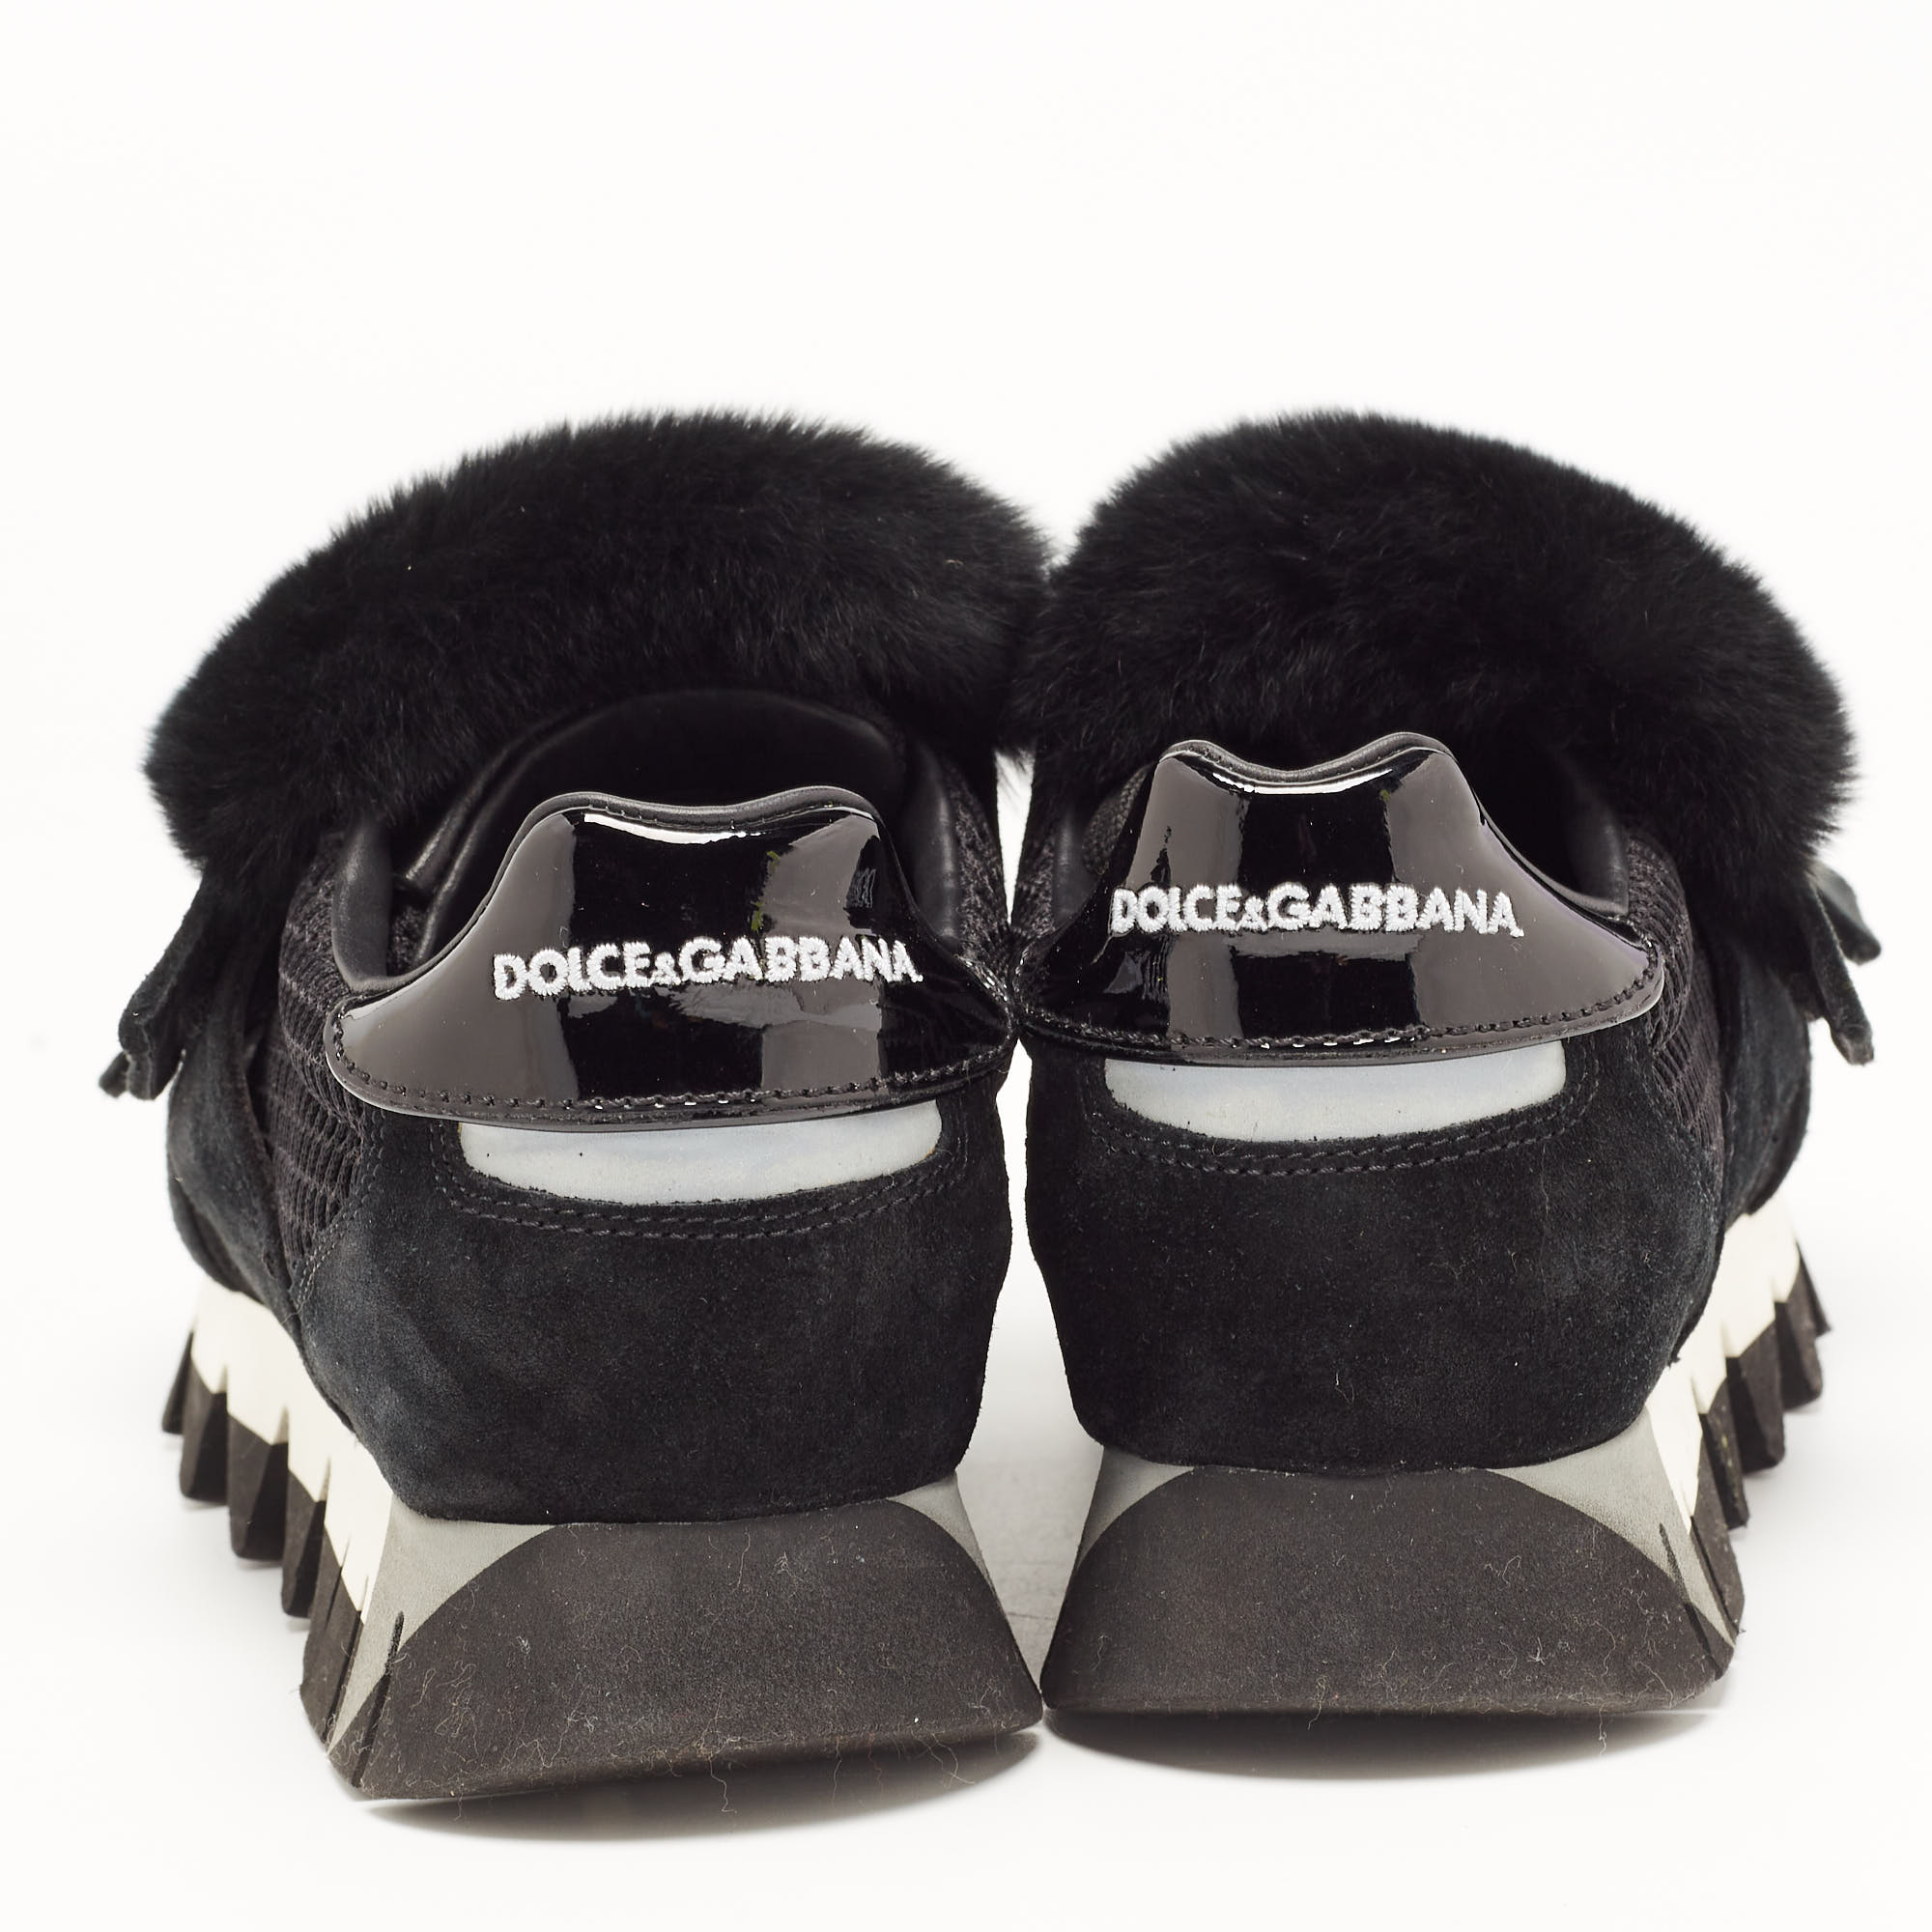 Dolce & Gabbana Black Mesh And Fur Low Top Sneakers Size 39